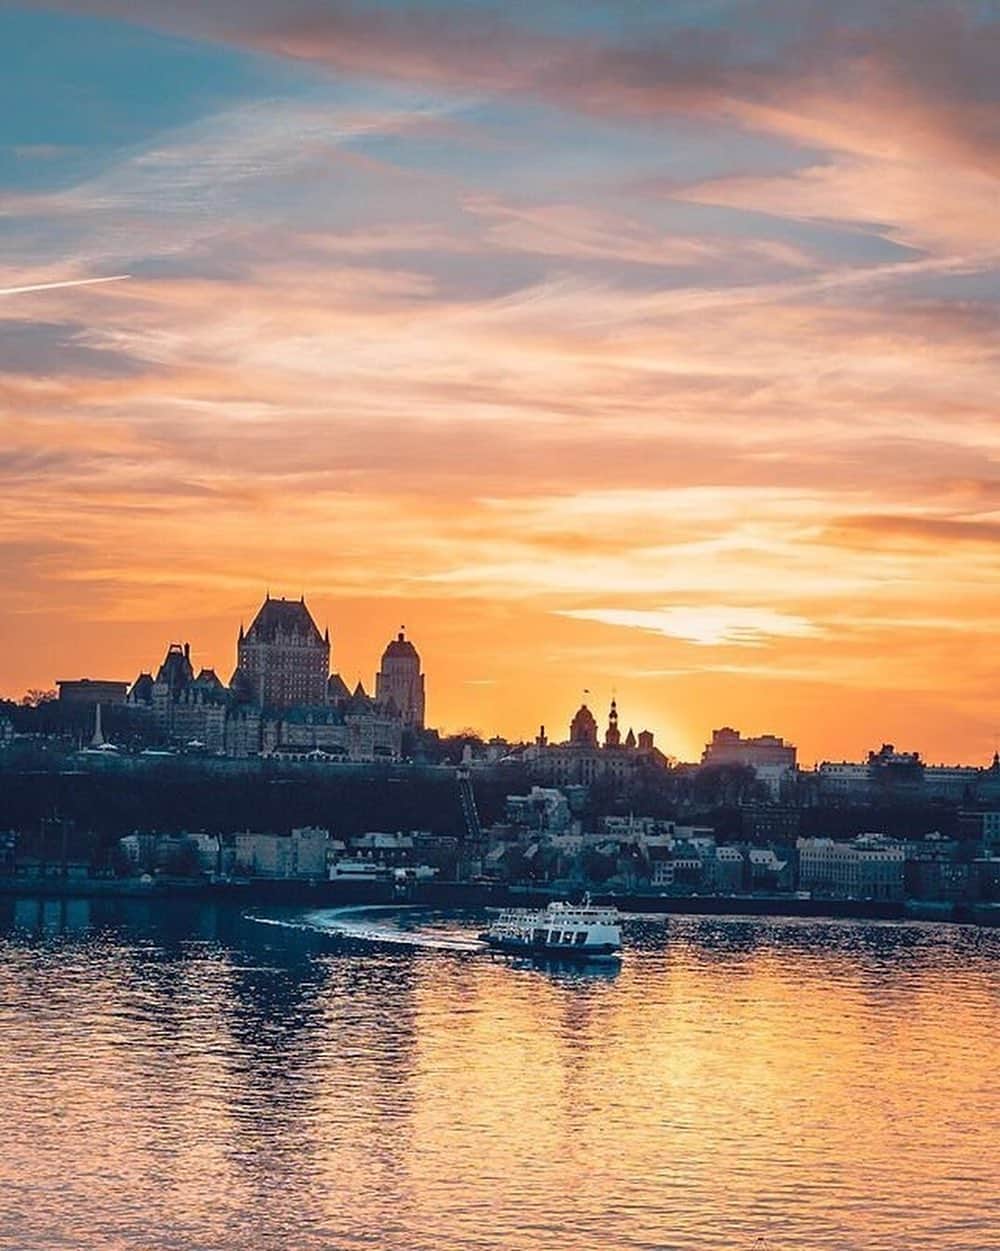 Explore Canadaさんのインスタグラム写真 - (Explore CanadaInstagram)「Today's #CanadaSpotlight is on @quebeccite!⁠⠀ ⁠⠀ There are many reasons to love Quebec City, from the quaint cobbled streets of Old Quebec, to the culinary and cultural experiences and the vibrant city life. Here are some of our favourite highlights:⁠⠀ ⁠⠀ ❤️ It was recently named Best City in Canada by @travelandleisure readers for the fifth year in a row!⁠⠀ 💜 The Château Frontenac, featured in the third slide, is an international icon and the most photographed hotel in the world.⁠⠀ 💚Old Quebec is a UNESCO World Heritage Site and Place Royale is the oldest French establishment in North America. Here, you can find beautiful architecture, bistros and artisanal boutiques to lose yourself in.⁠⠀ 💛 Winter is one of the best seasons to enjoy Quebec City - attractions include a huge toboggan slide, an ice hotel and the Quebec Winter Carnival.⁠⠀ ⁠⠀ Head on over to @quebeccite for more picturesque photo, and share your own shots of beautiful Quebec City using #quebeccite!⁠⠀ ⁠⠀ #ExploreCanadaFromHome #ForGlowingHearts⁠⠀ ⁠⠀ 📷: ⁠⠀ ⁠⠀ 1&2. @manucoveney ⁠⠀ 3. @lauretardif⁠⠀ 4. @charlymtl⁠⠀ 5. @vic_nkt⁠⠀ 6. @chopardphotography⁠⠀ 7. @explorecanada⁠⠀ 8. @andrea_haz⁠⠀ ⁠⠀ 📍: @quebeccite⁠⠀ ⁠⠀ #QuebecCite⁠⠀」7月23日 1時18分 - explorecanada